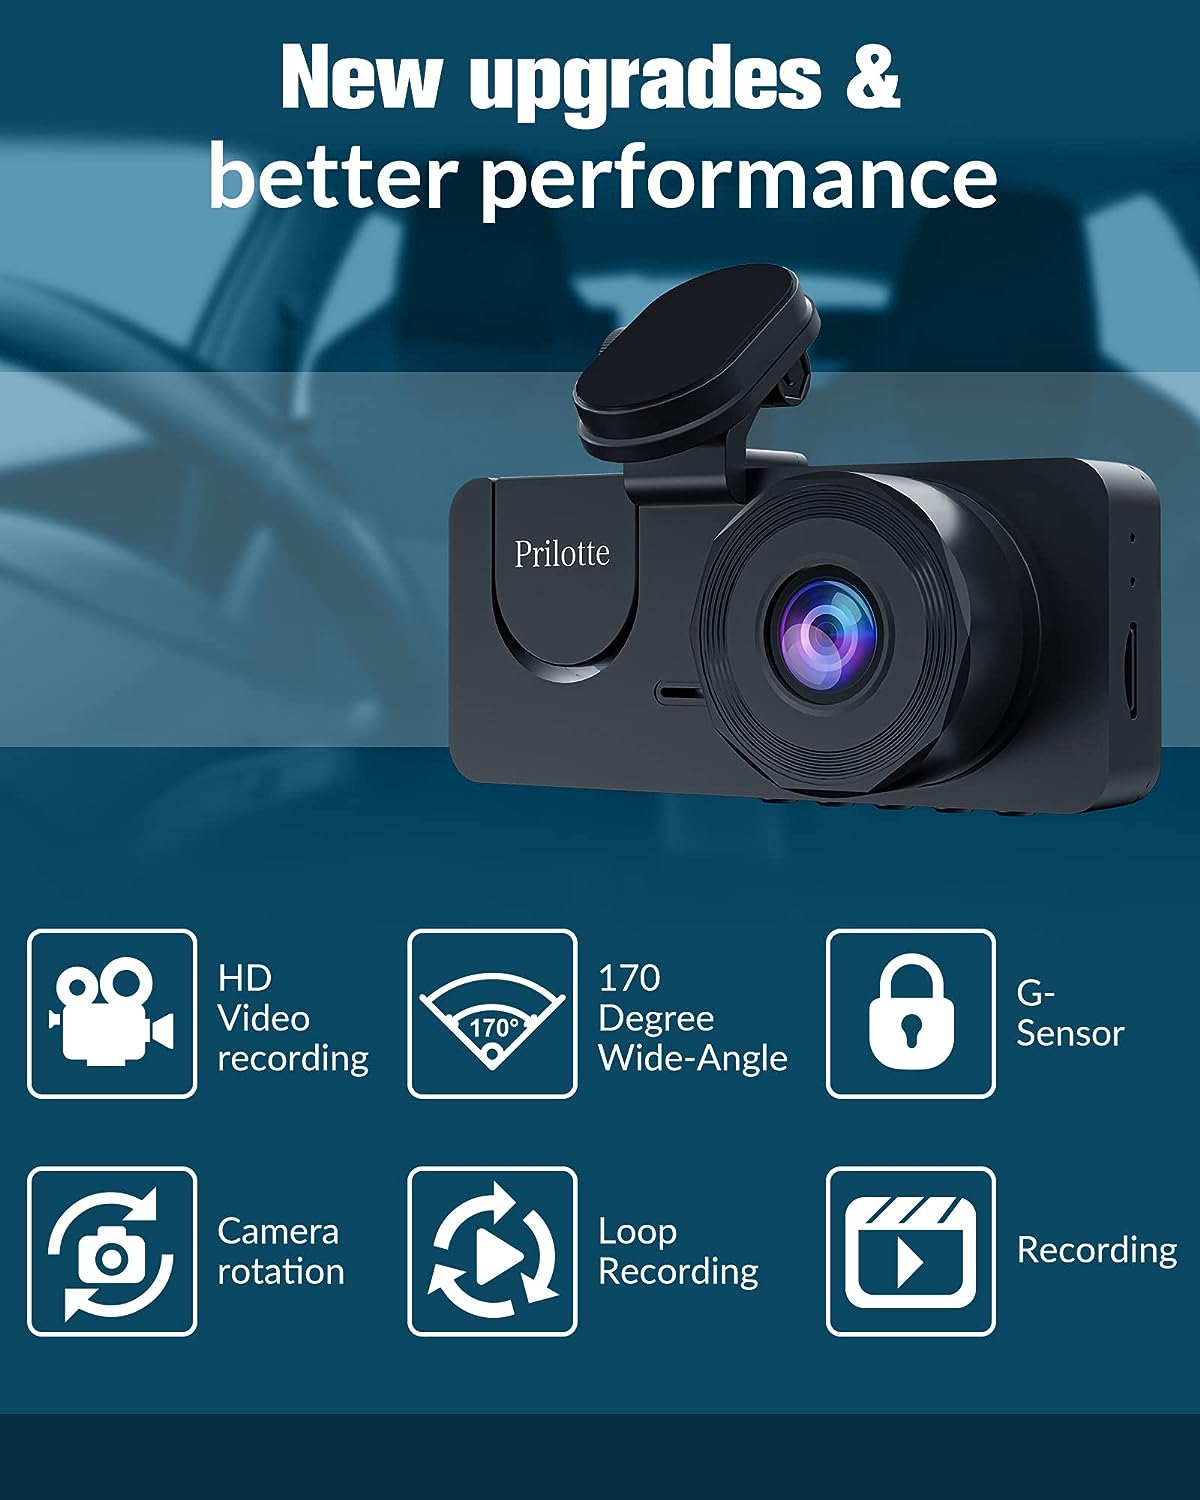 3 Channel Dash Cam Front and Rear Inside,1080P Full HD 170 Deg Wide Angle Dashboard Camera with 32GB SD Card,2.0 inch IPS Screen,Built in IR Night Vision,G-Sensor,Loop Recording,24H Parking Recording